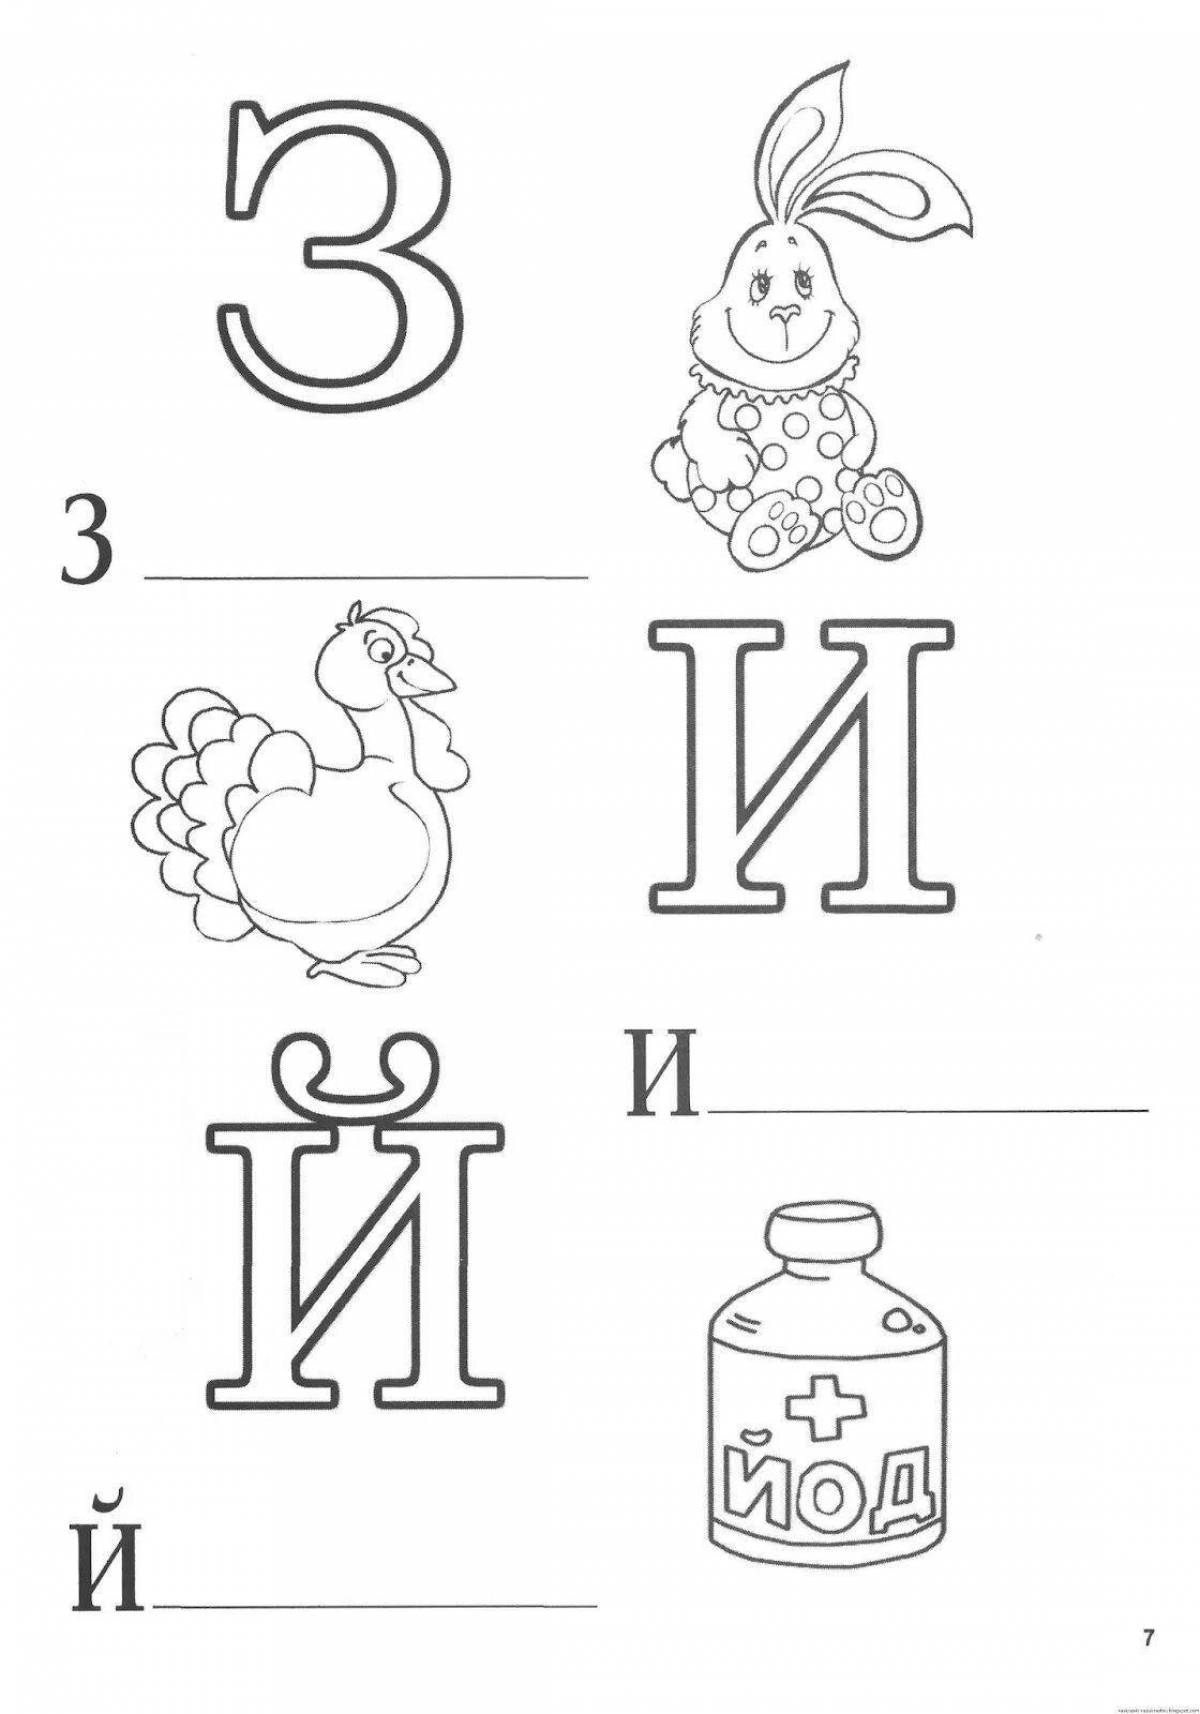 Fun letter coloring